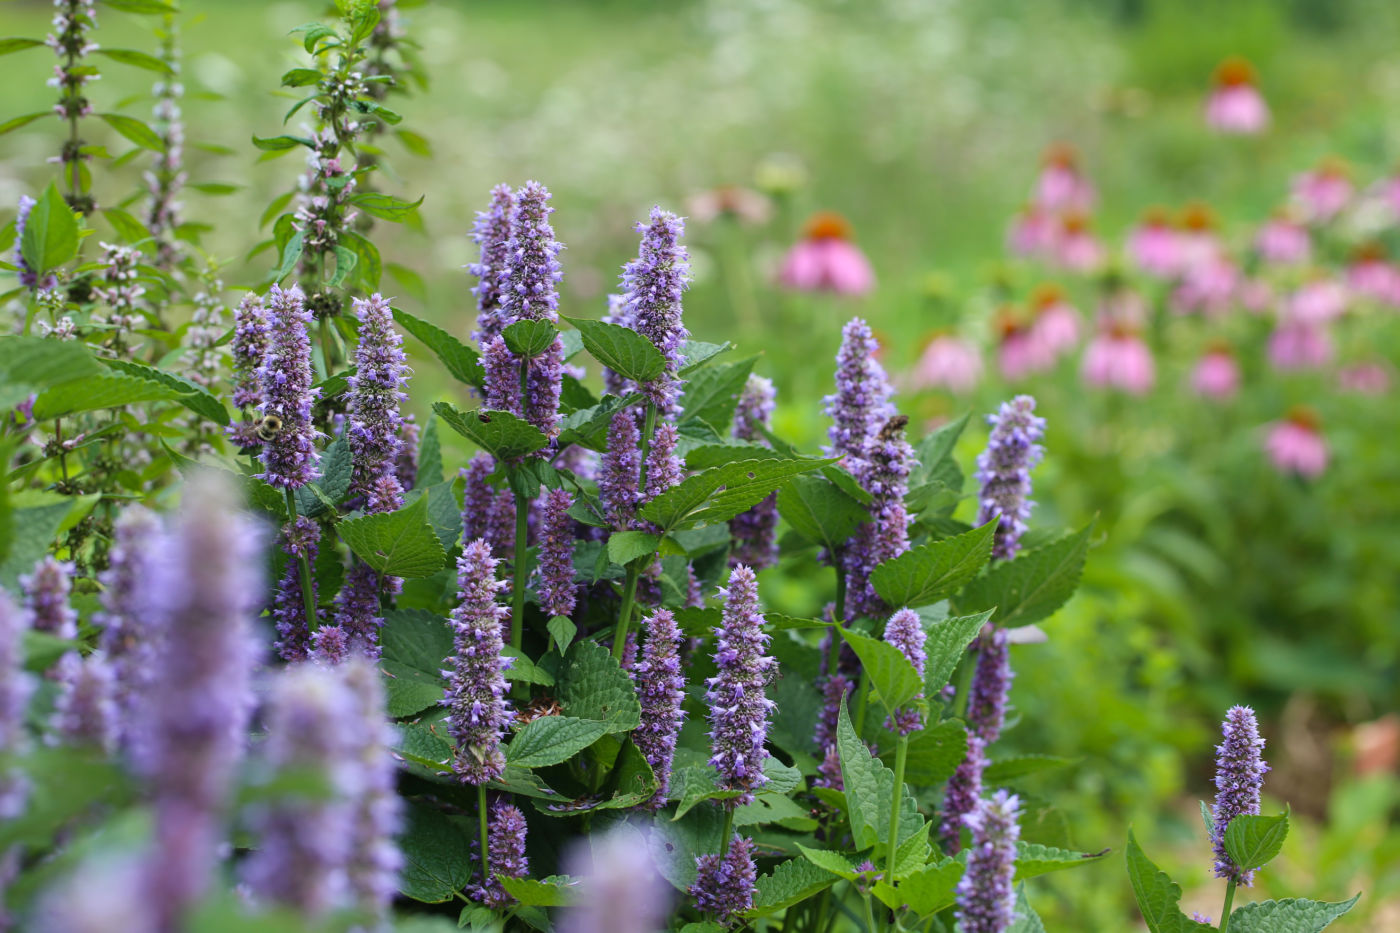 Anise hyssop (Agastache foeniculum) is a prime nectary plant, attracting a veritable promenade of pollinators